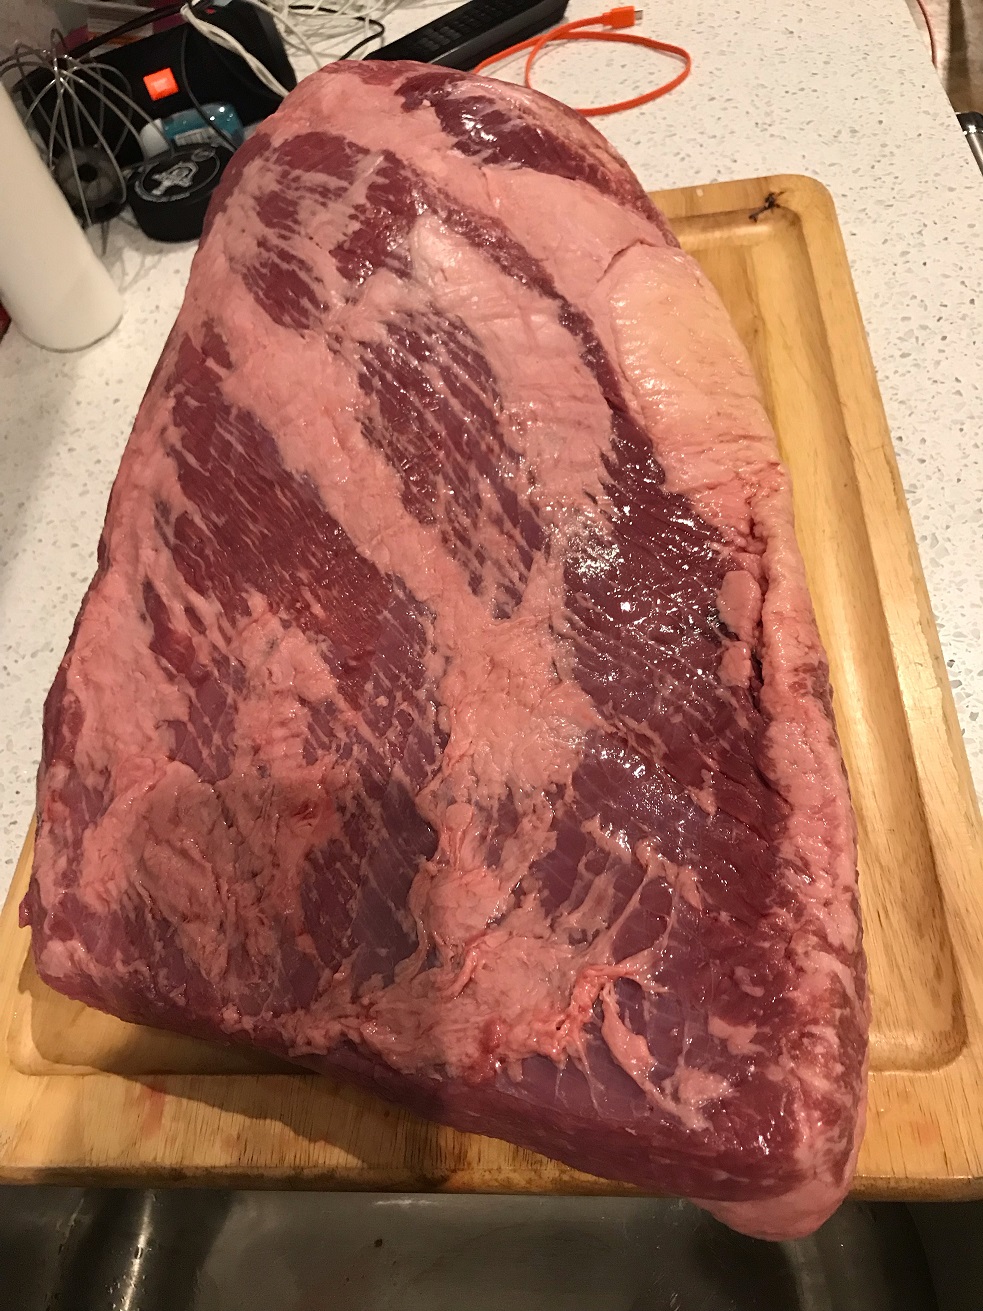 Beginning to learn how to trim a brisket.